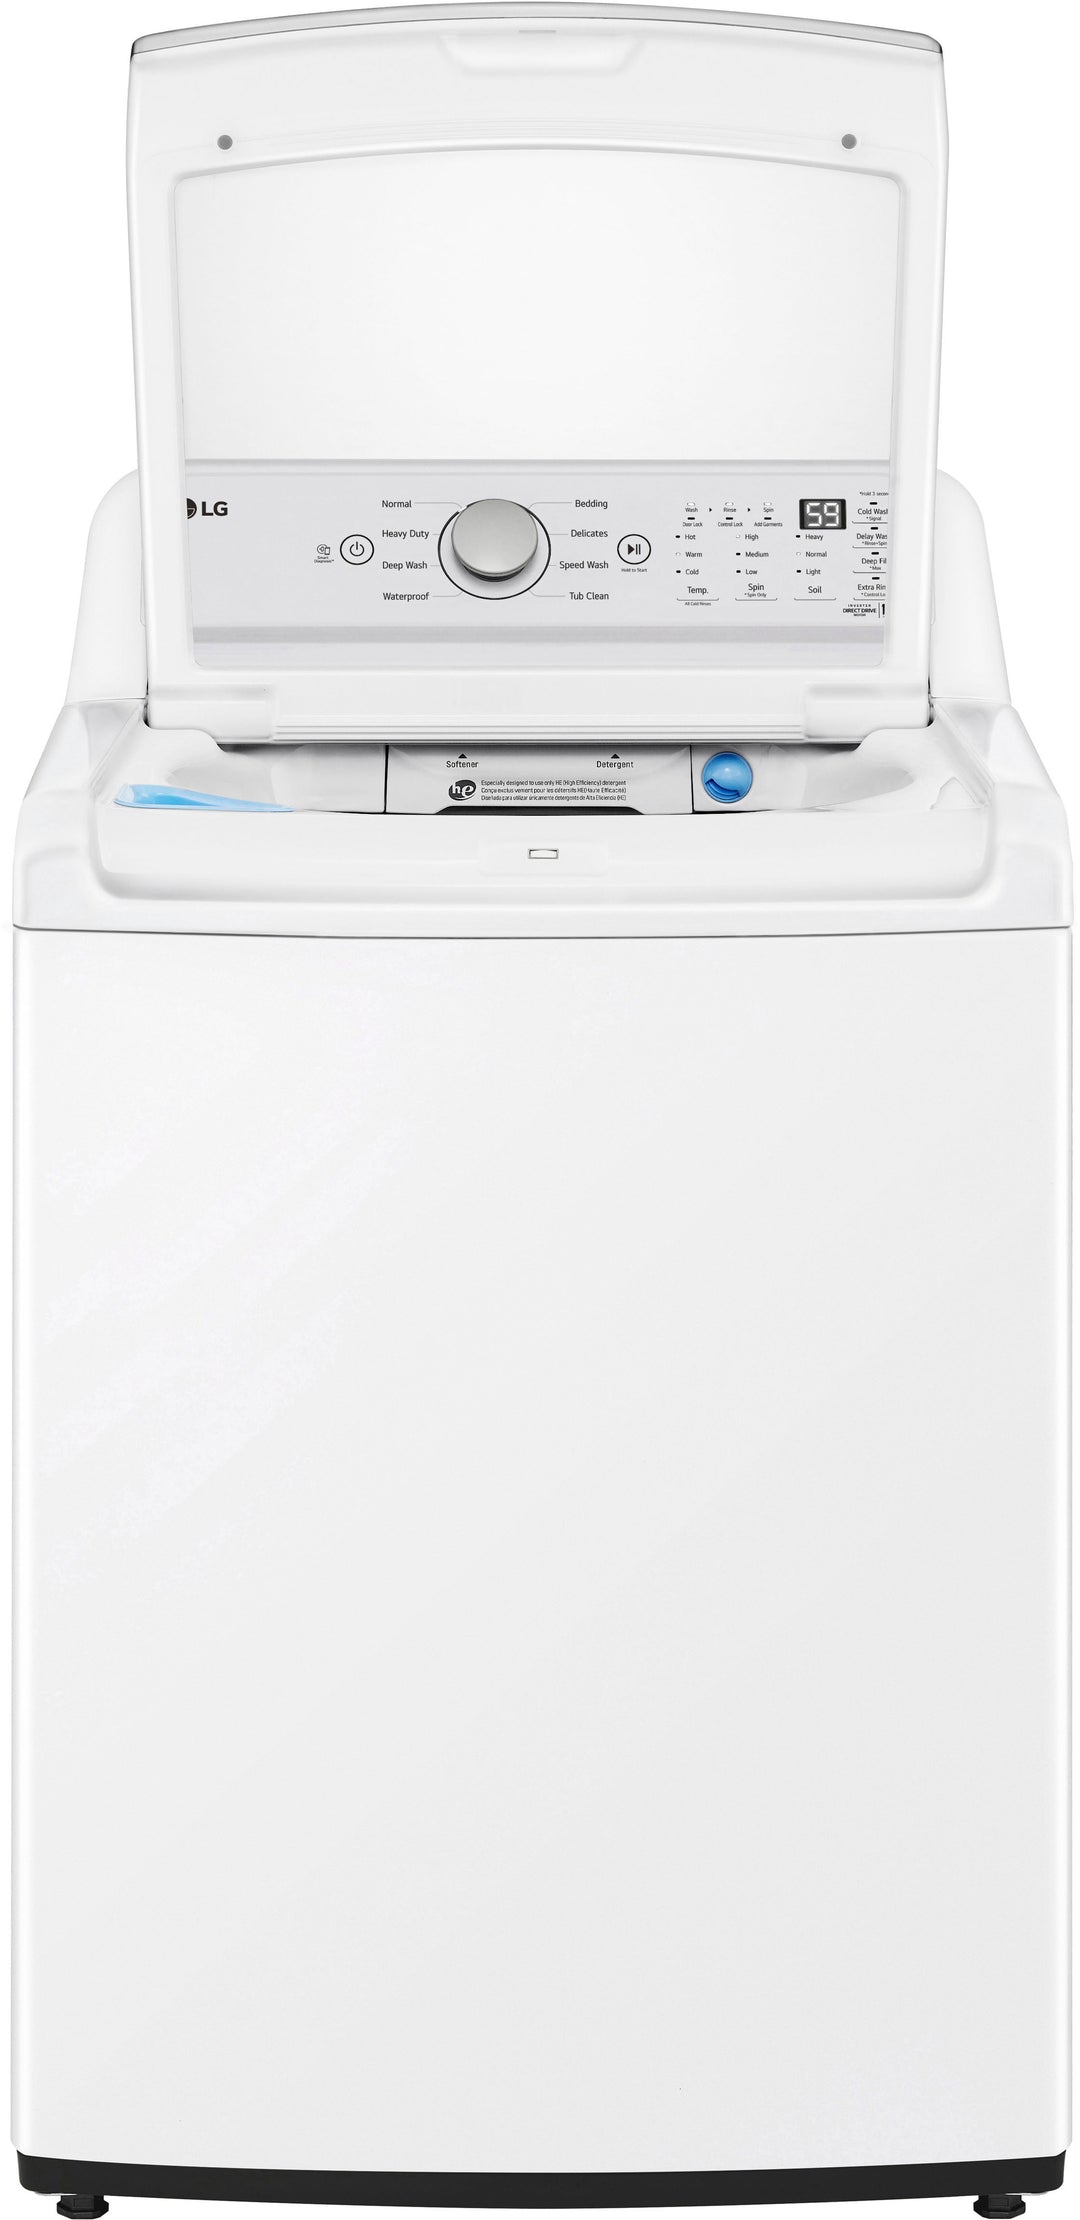 LG - 4.8 Cu. Ft. High-Efficiency Smart Top Load Washer with 4 Way Agitator and TurboDrum - White_11